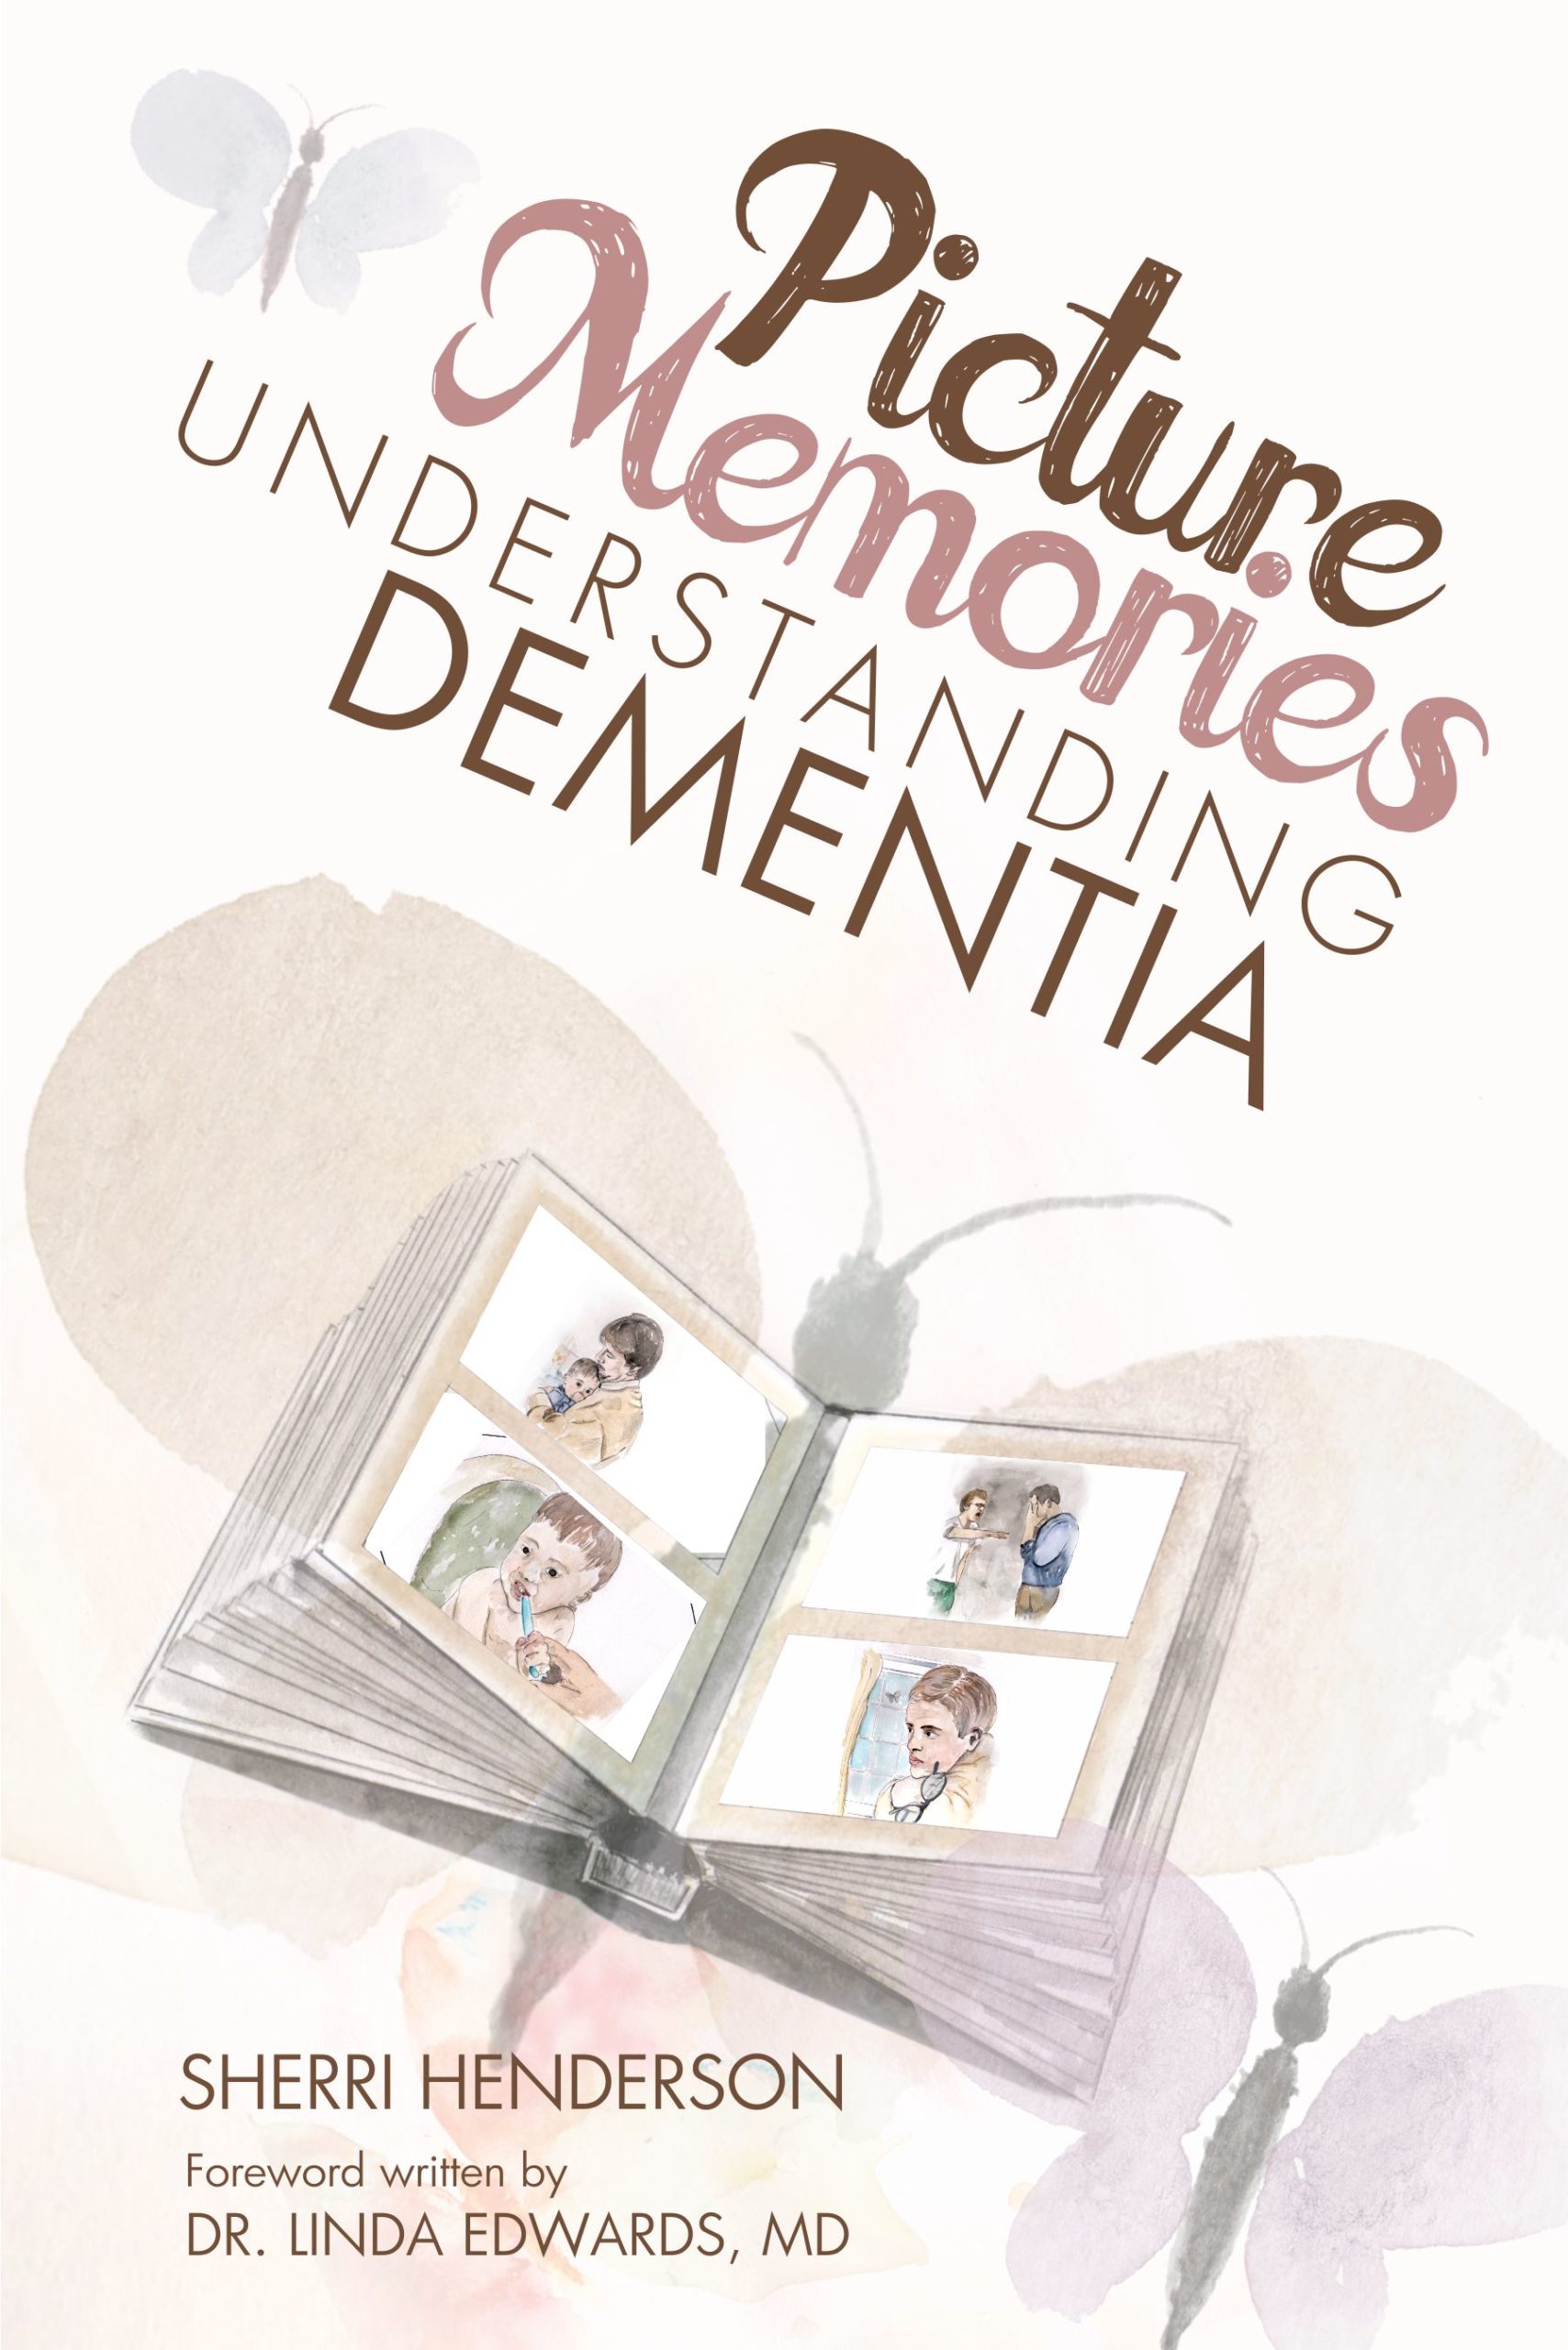 Book cover of Picture Memories Understanding Dementia by Sherri Henderson forward written by Dr. Linda Edwards, MD